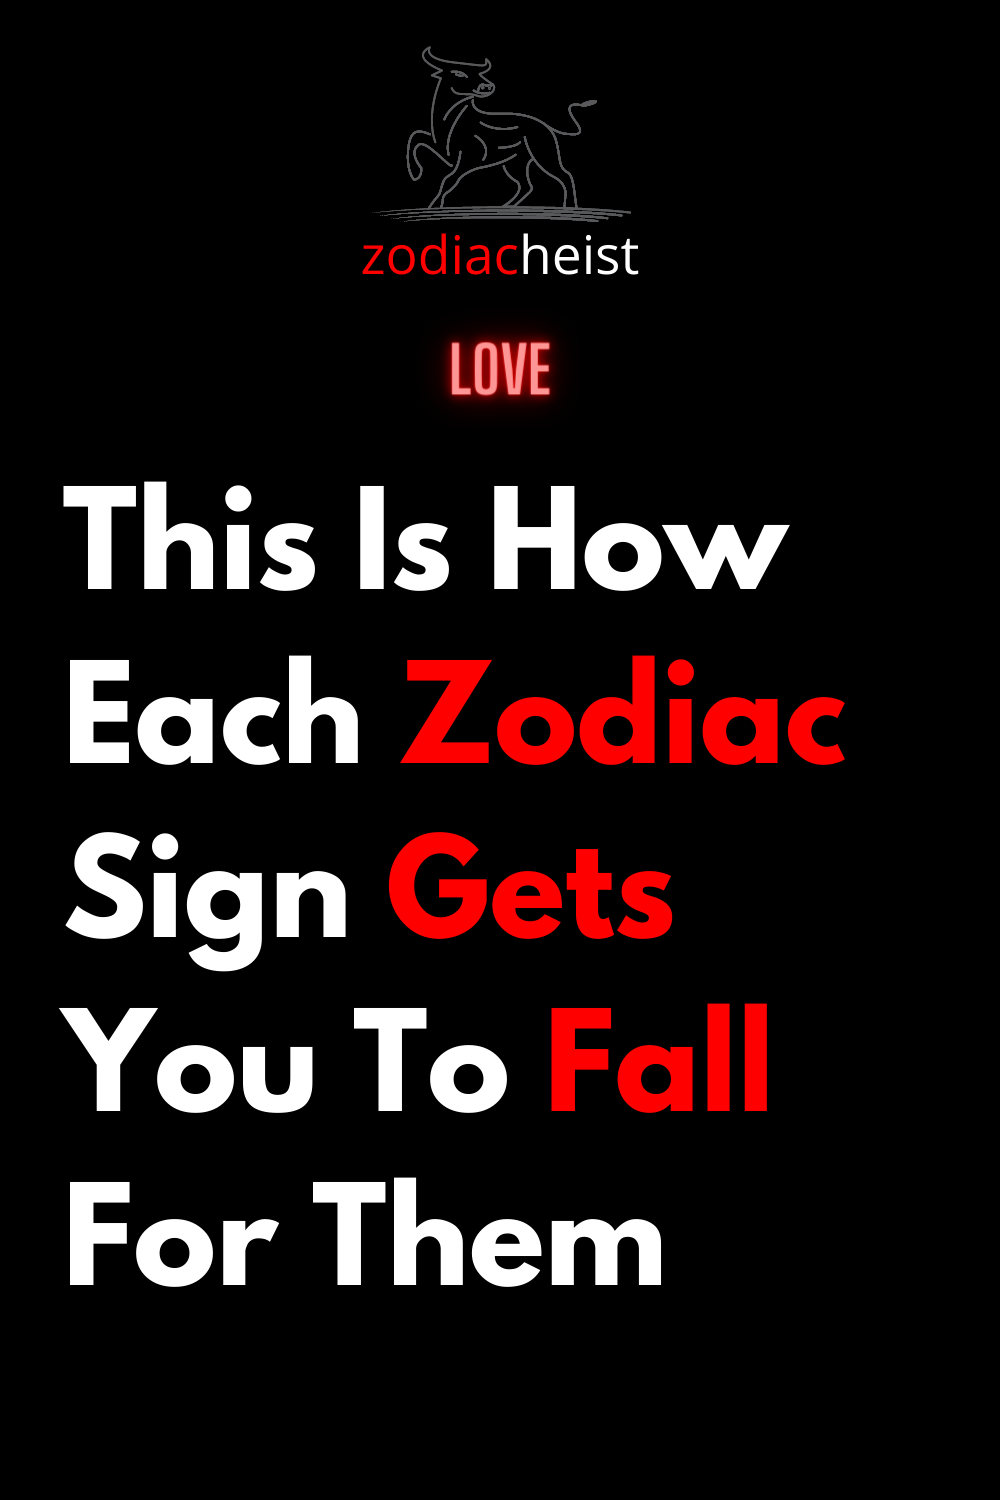 This Is How Each Zodiac Sign Gets You To Fall For Them